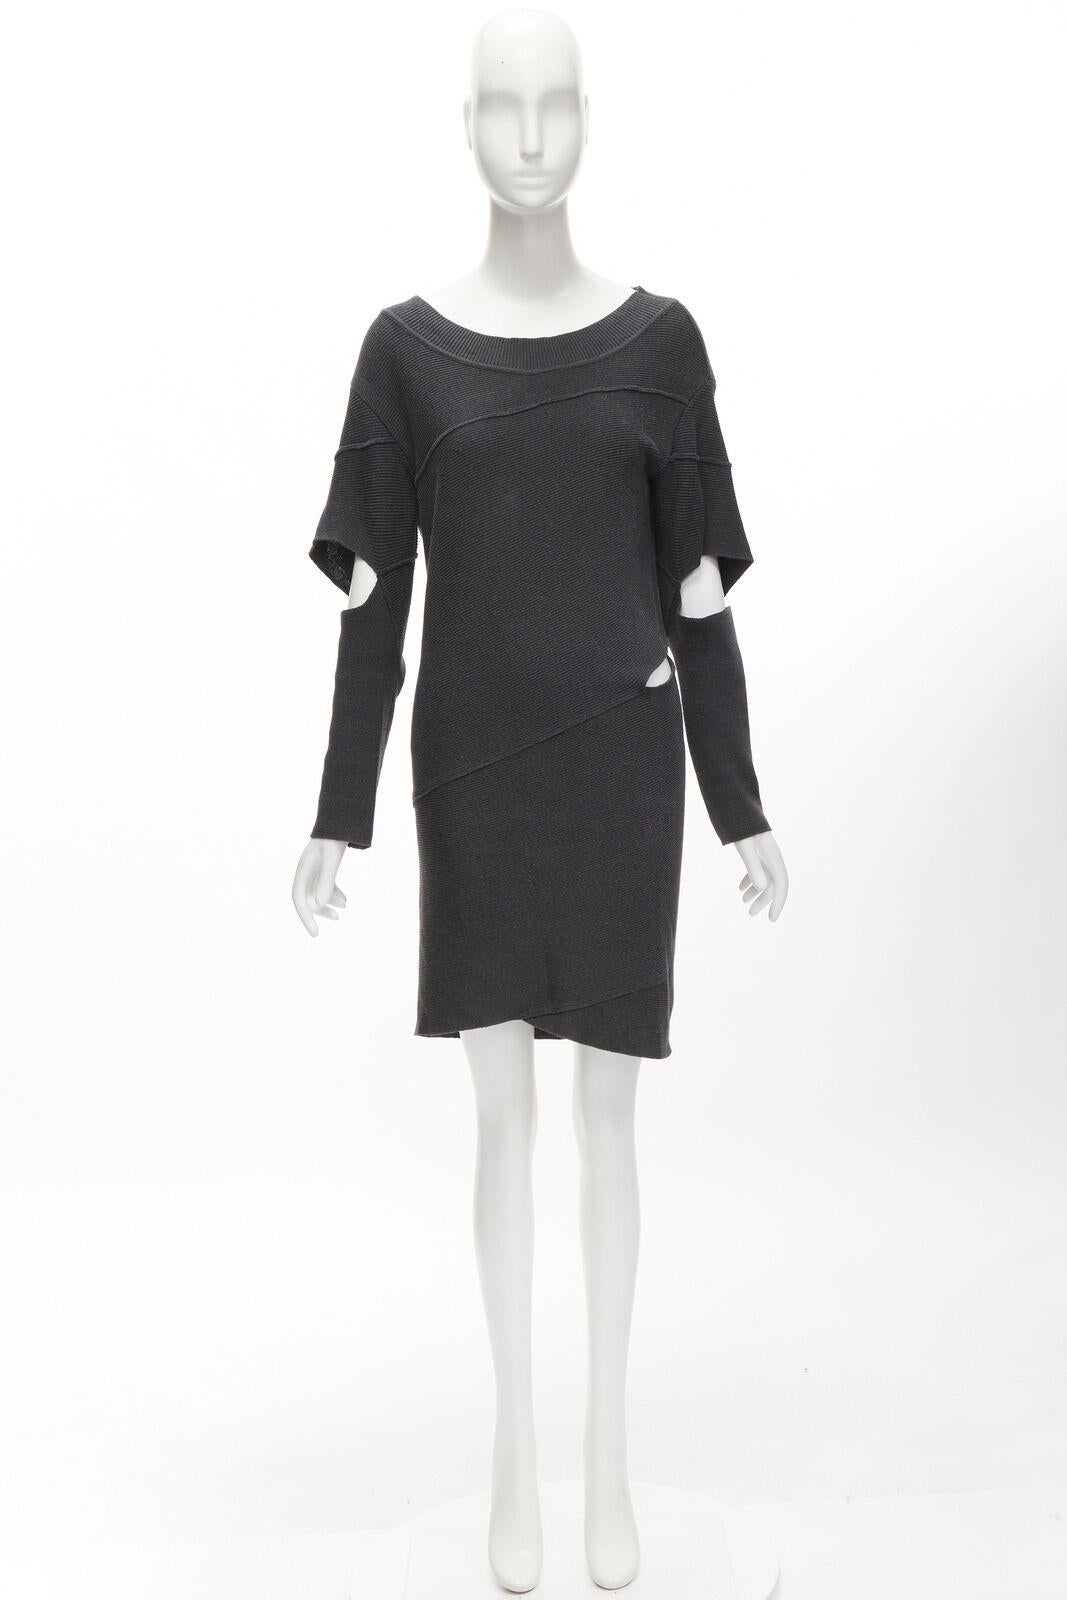 rare ISSEY MIYAKE 1980's Vintage grey deconstructed bias cutout sweater dress M For Sale 5